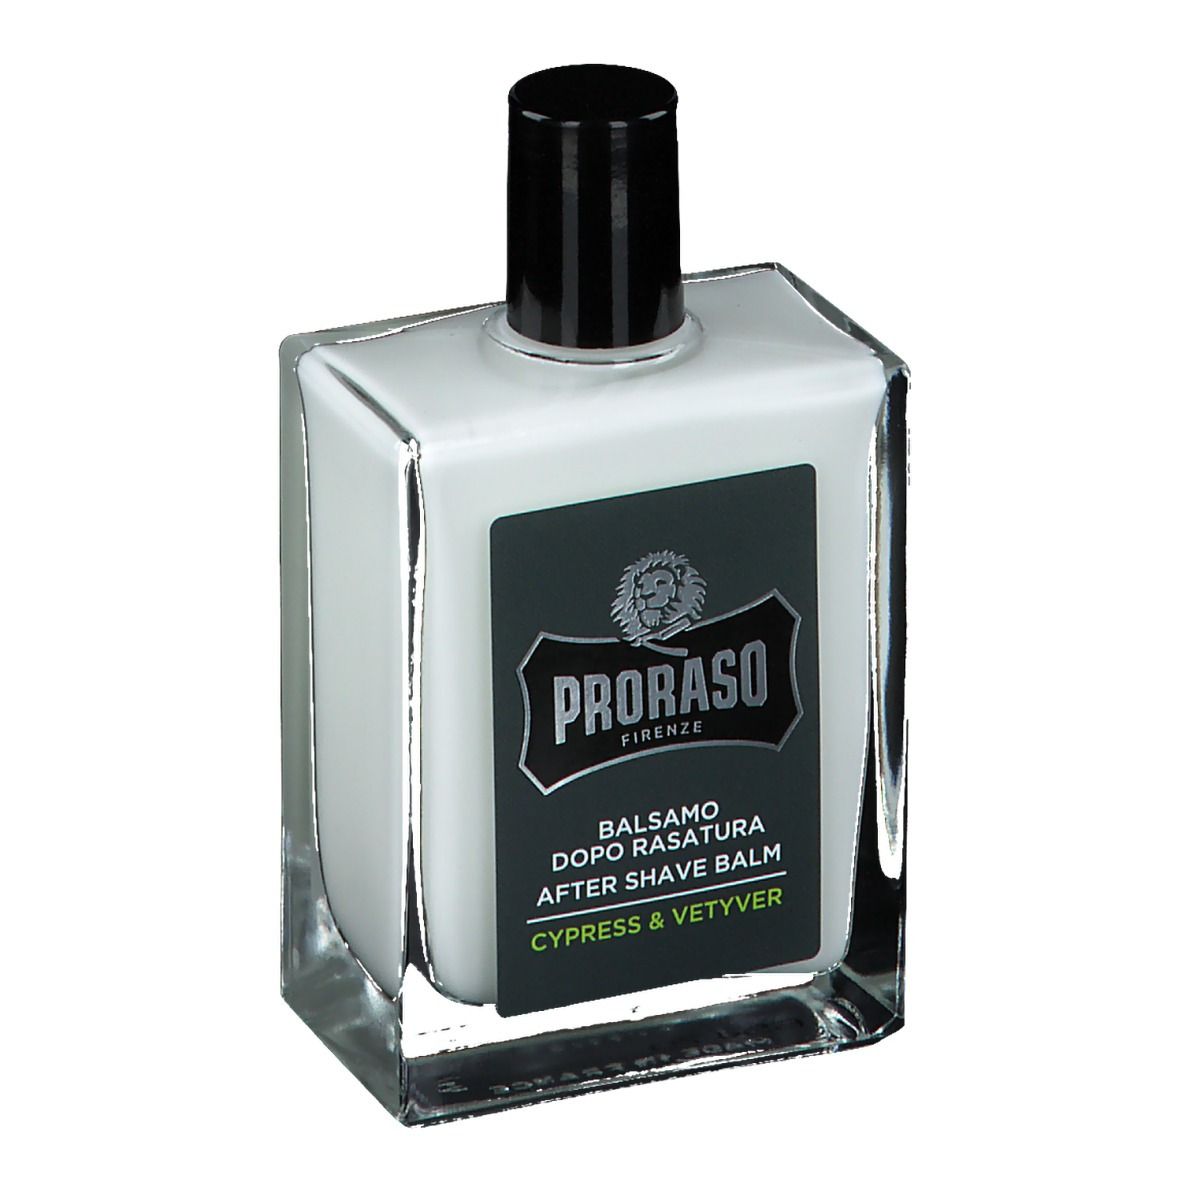 Image of PRORASO Cypress & Vetyver After Shave Balsam